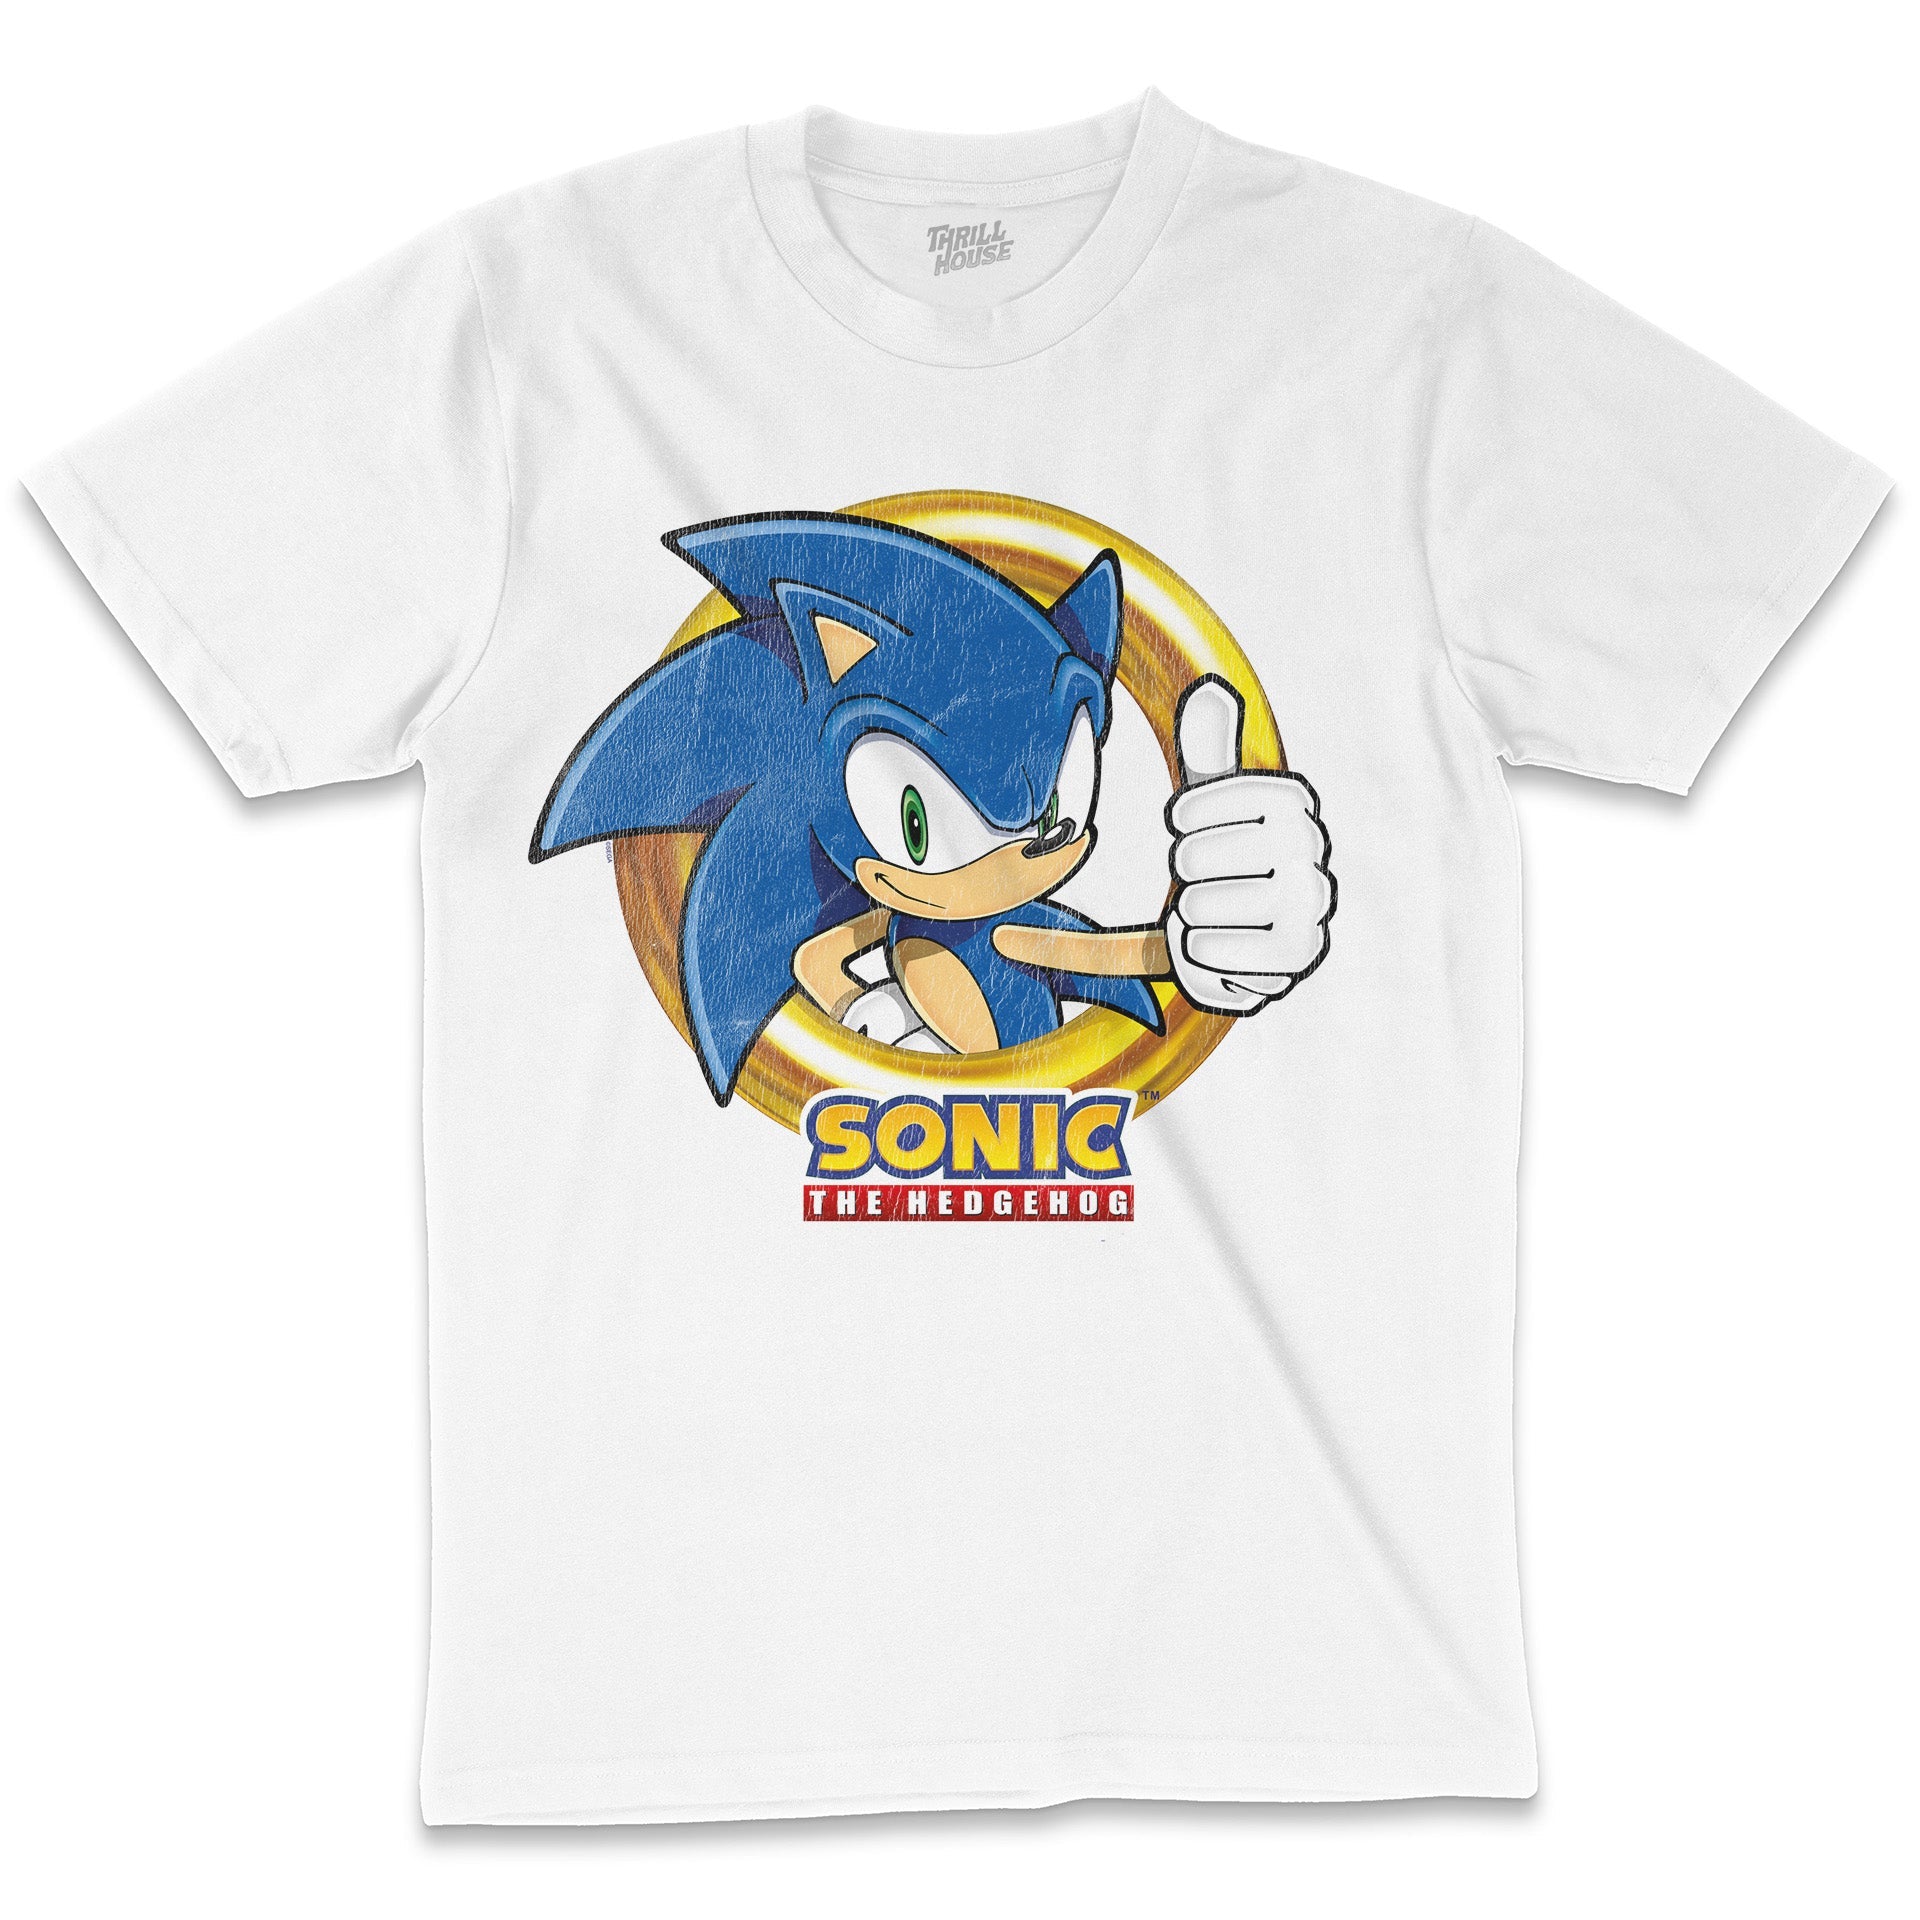 Sonic The Hedgehog Gold Ring Retro 90s Video Game Cartridge Console Officially Licensed SEGA T-Shirt